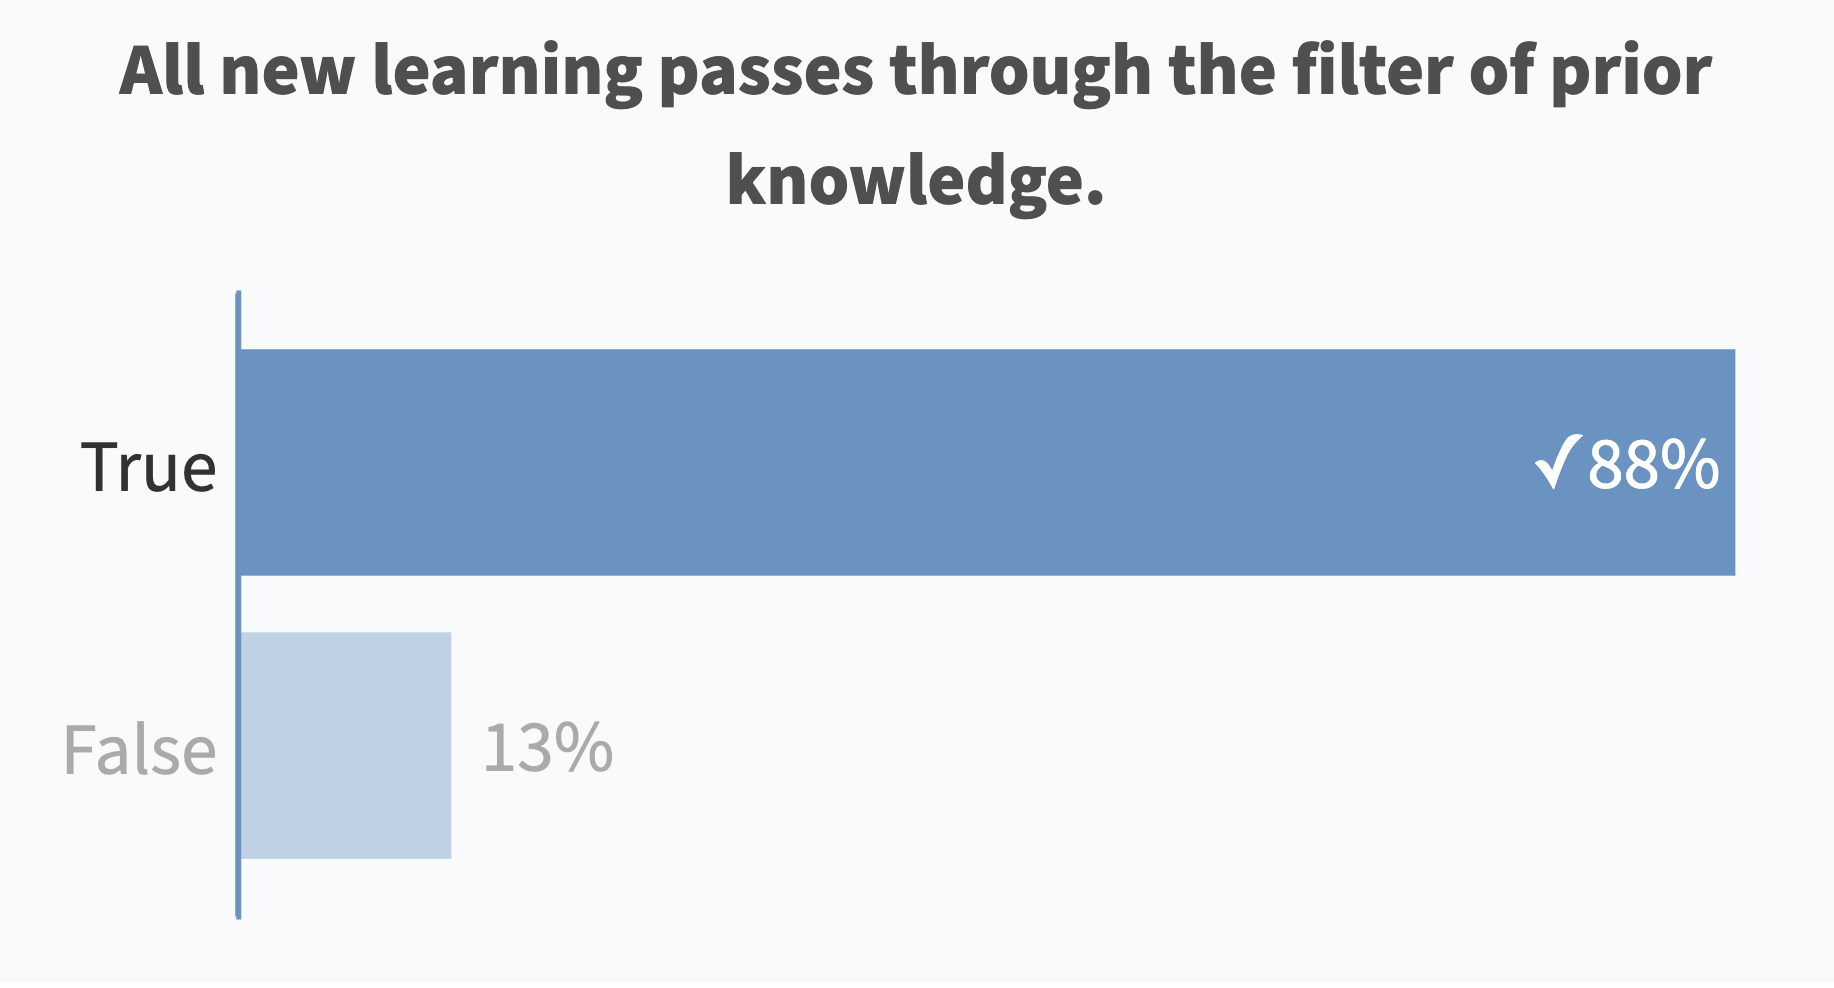 All new learning passes through the filter of prior knowledge. (True: 88% correct)